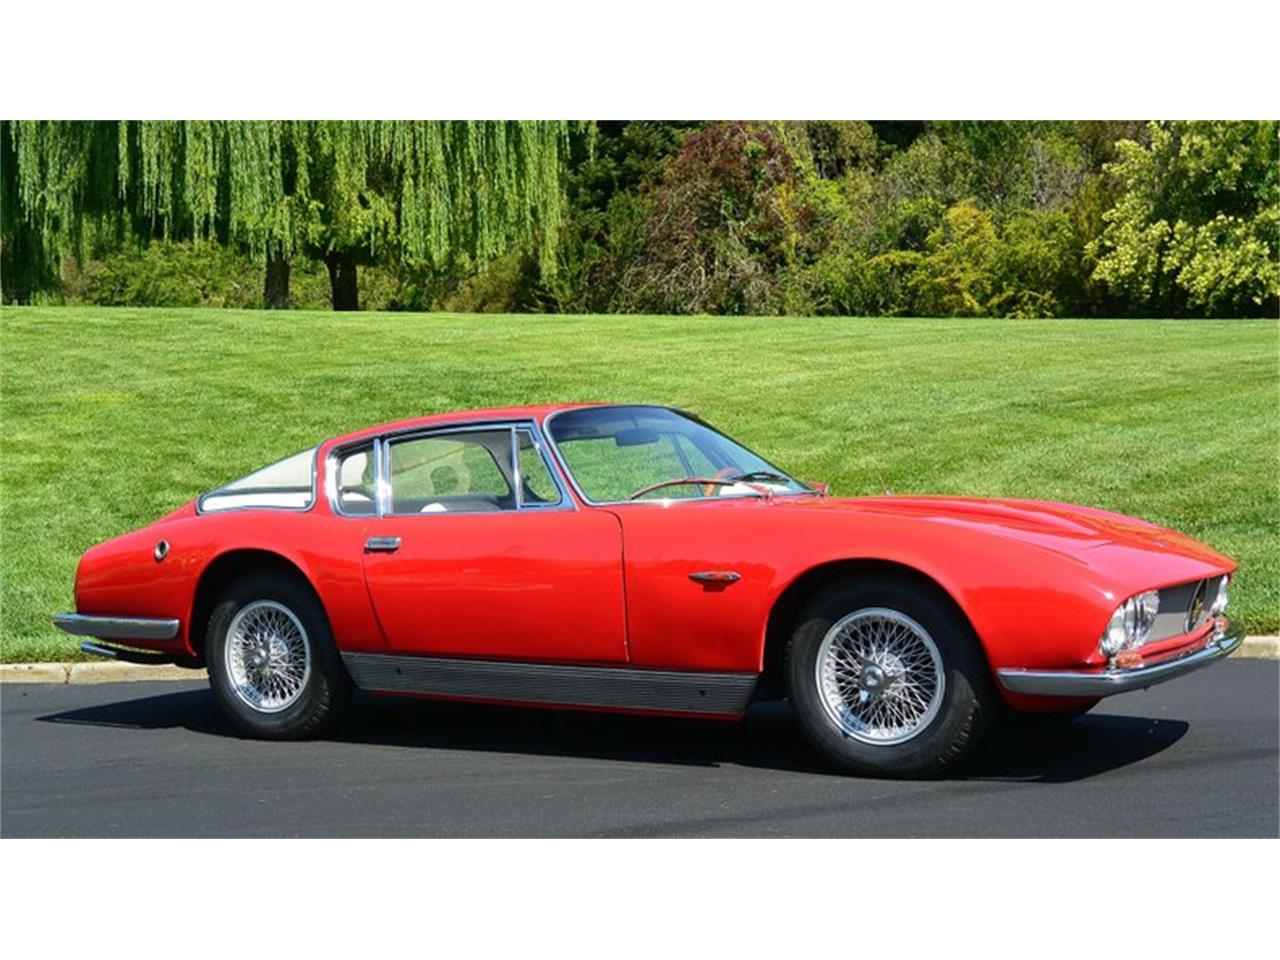 For Sale at Auction: 1962 Maserati 3500 in Monterey, California for sale in Monterey, CA